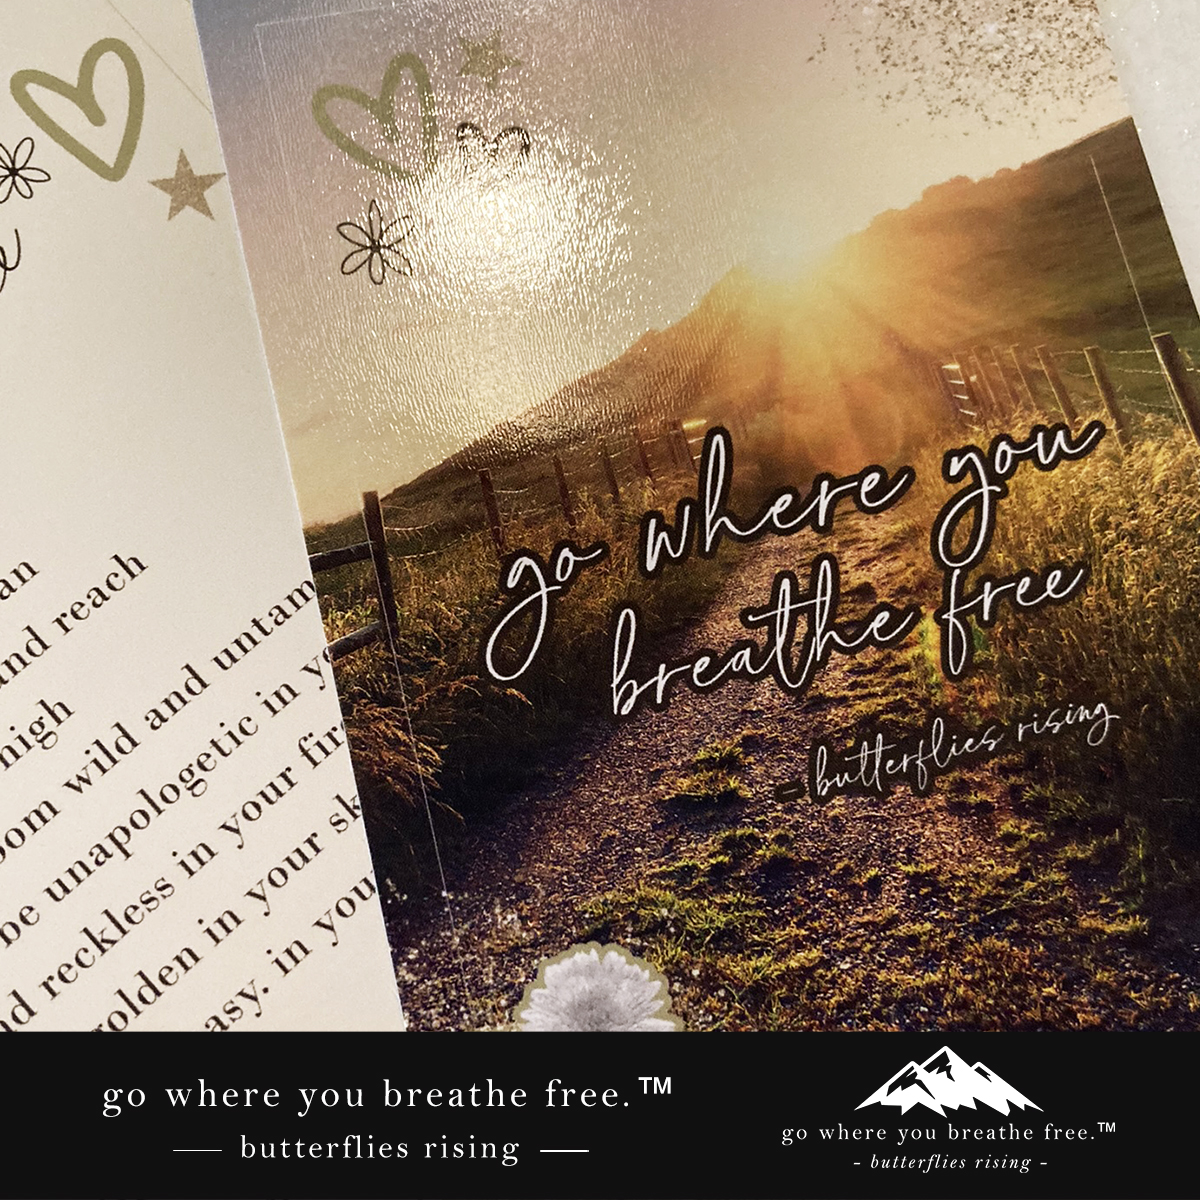 go where you breathe free - butterflies rising poetry collection